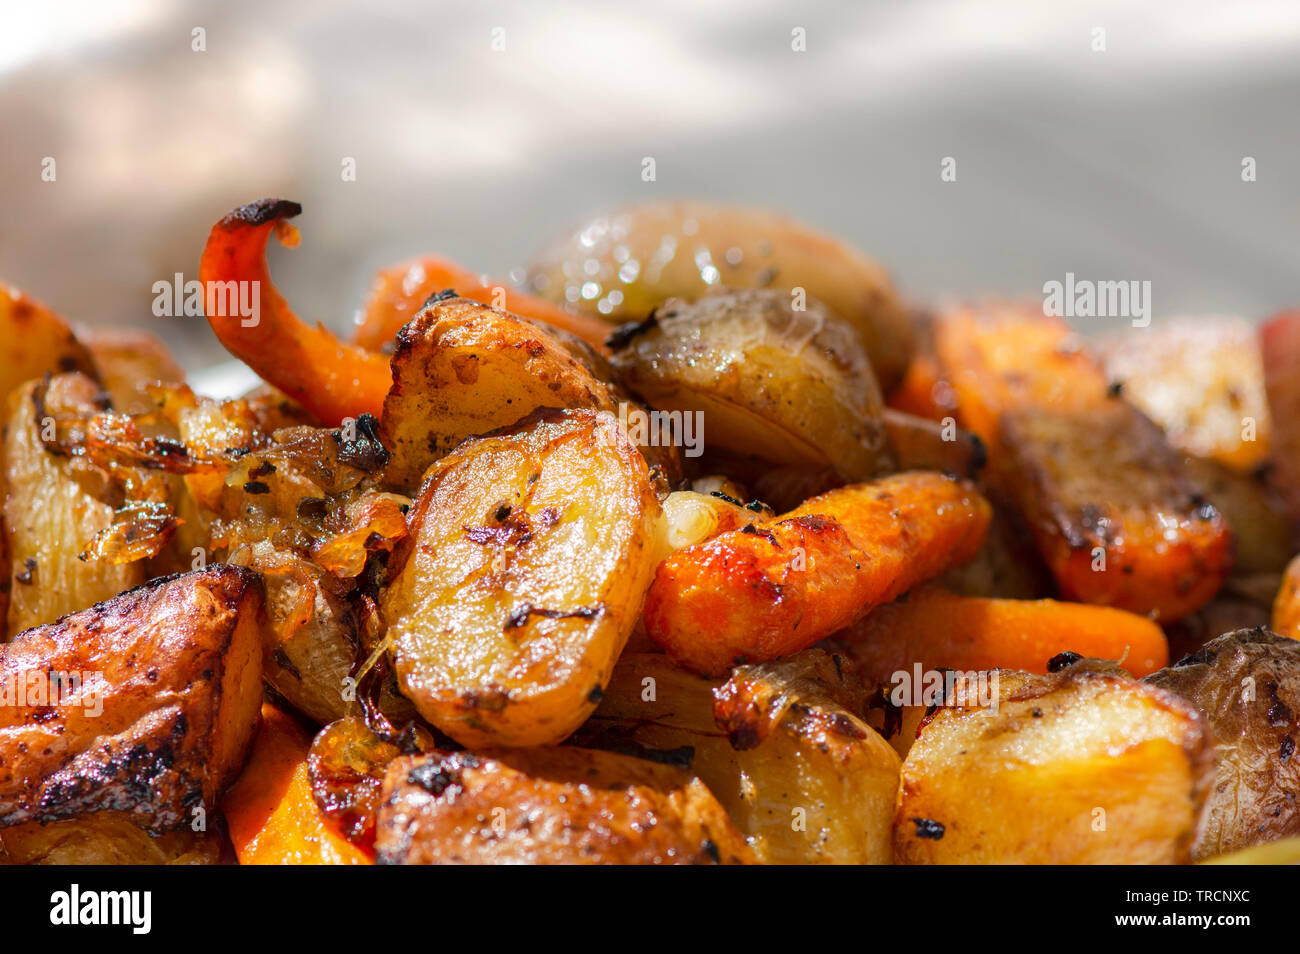 Oven roasted potatoes with onions and carrots. Stock Photo